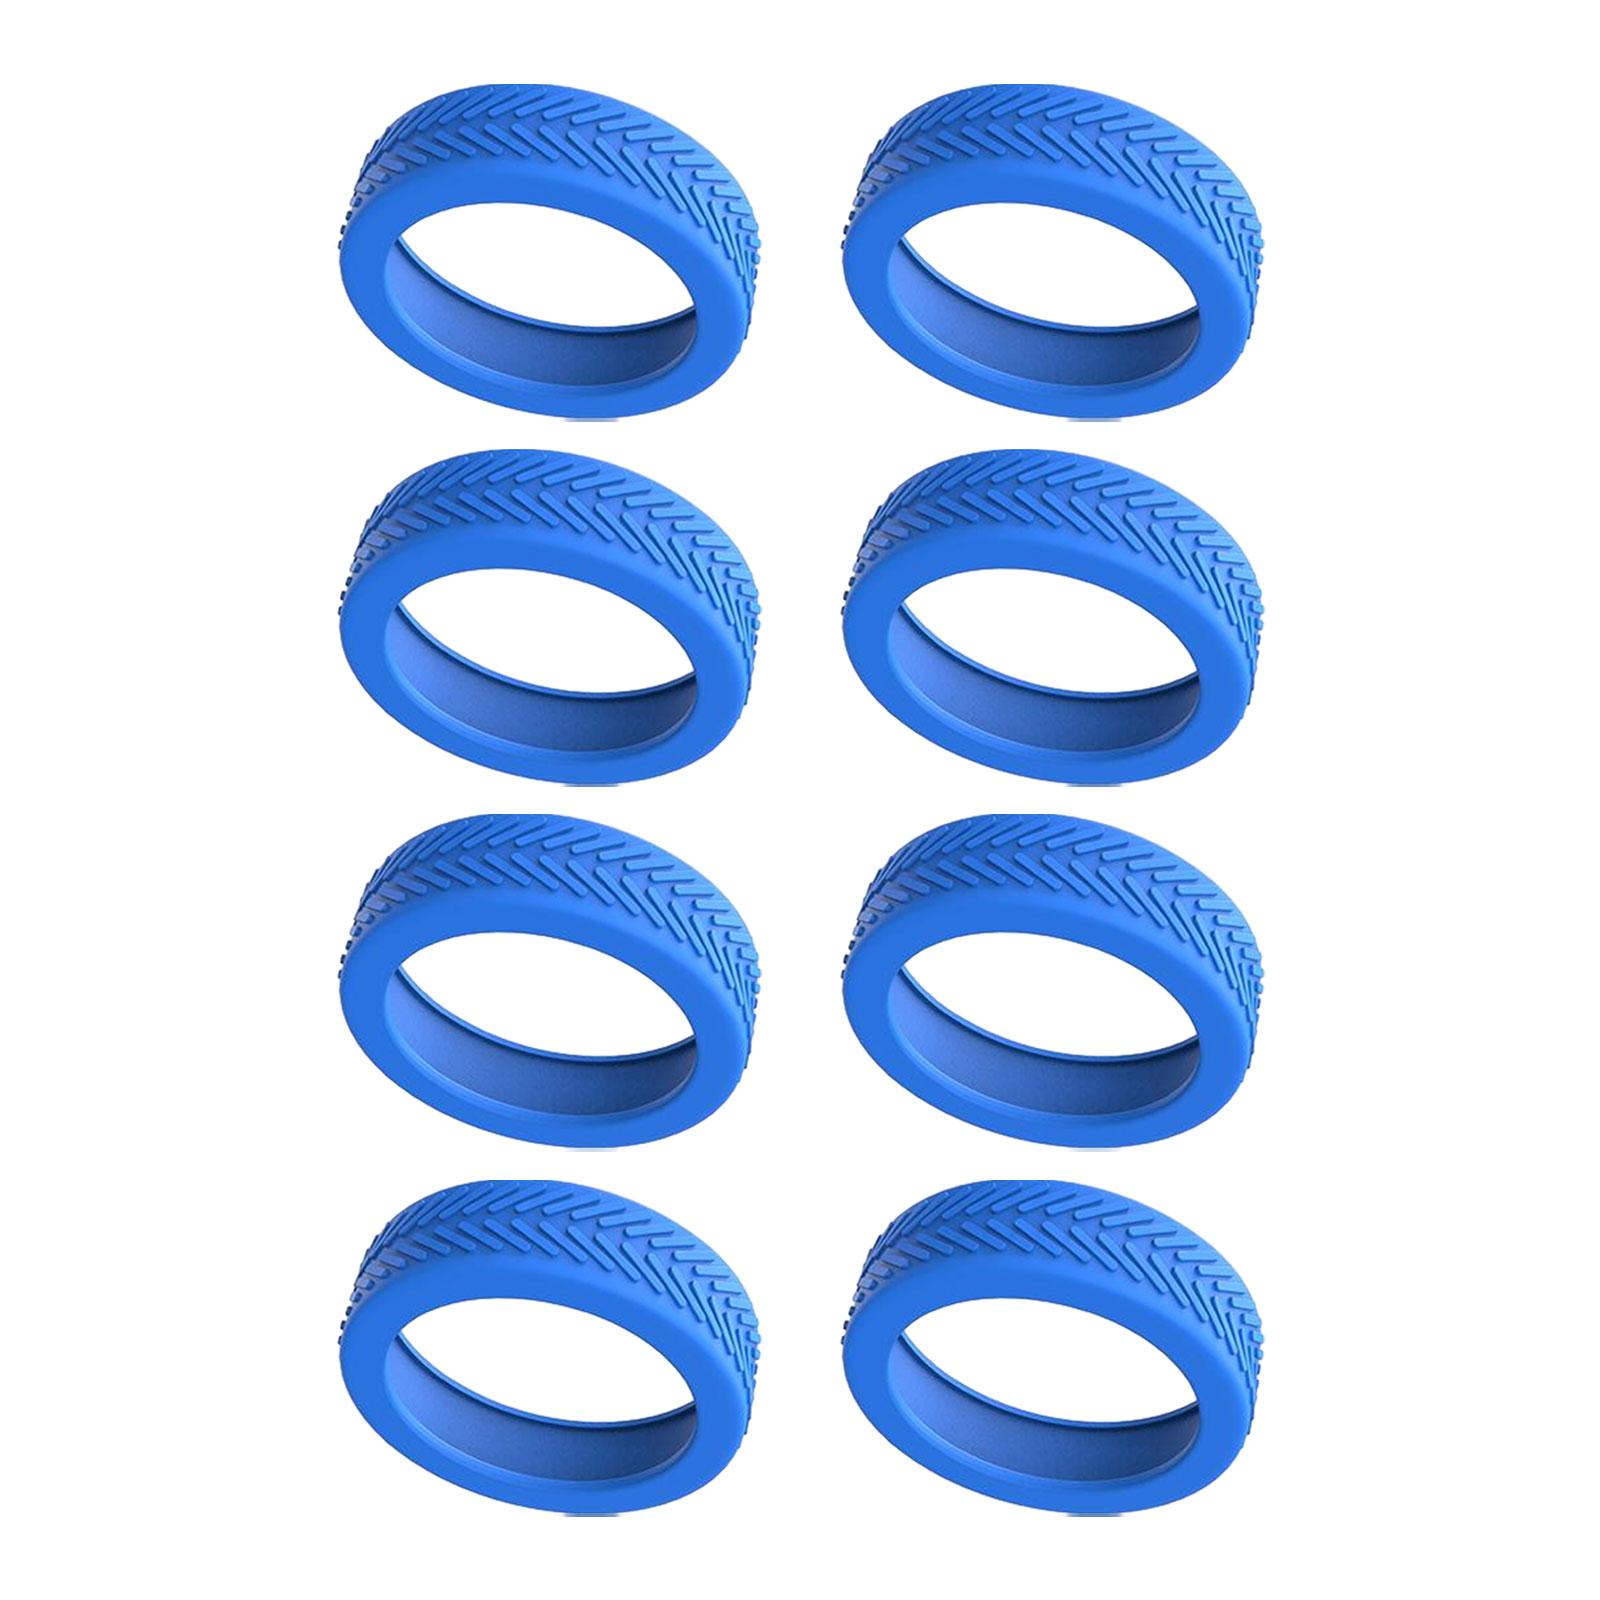 8x Silicone Luggage Wheel Covers Protector for 1.9inch-2.5inch Wheels Blue